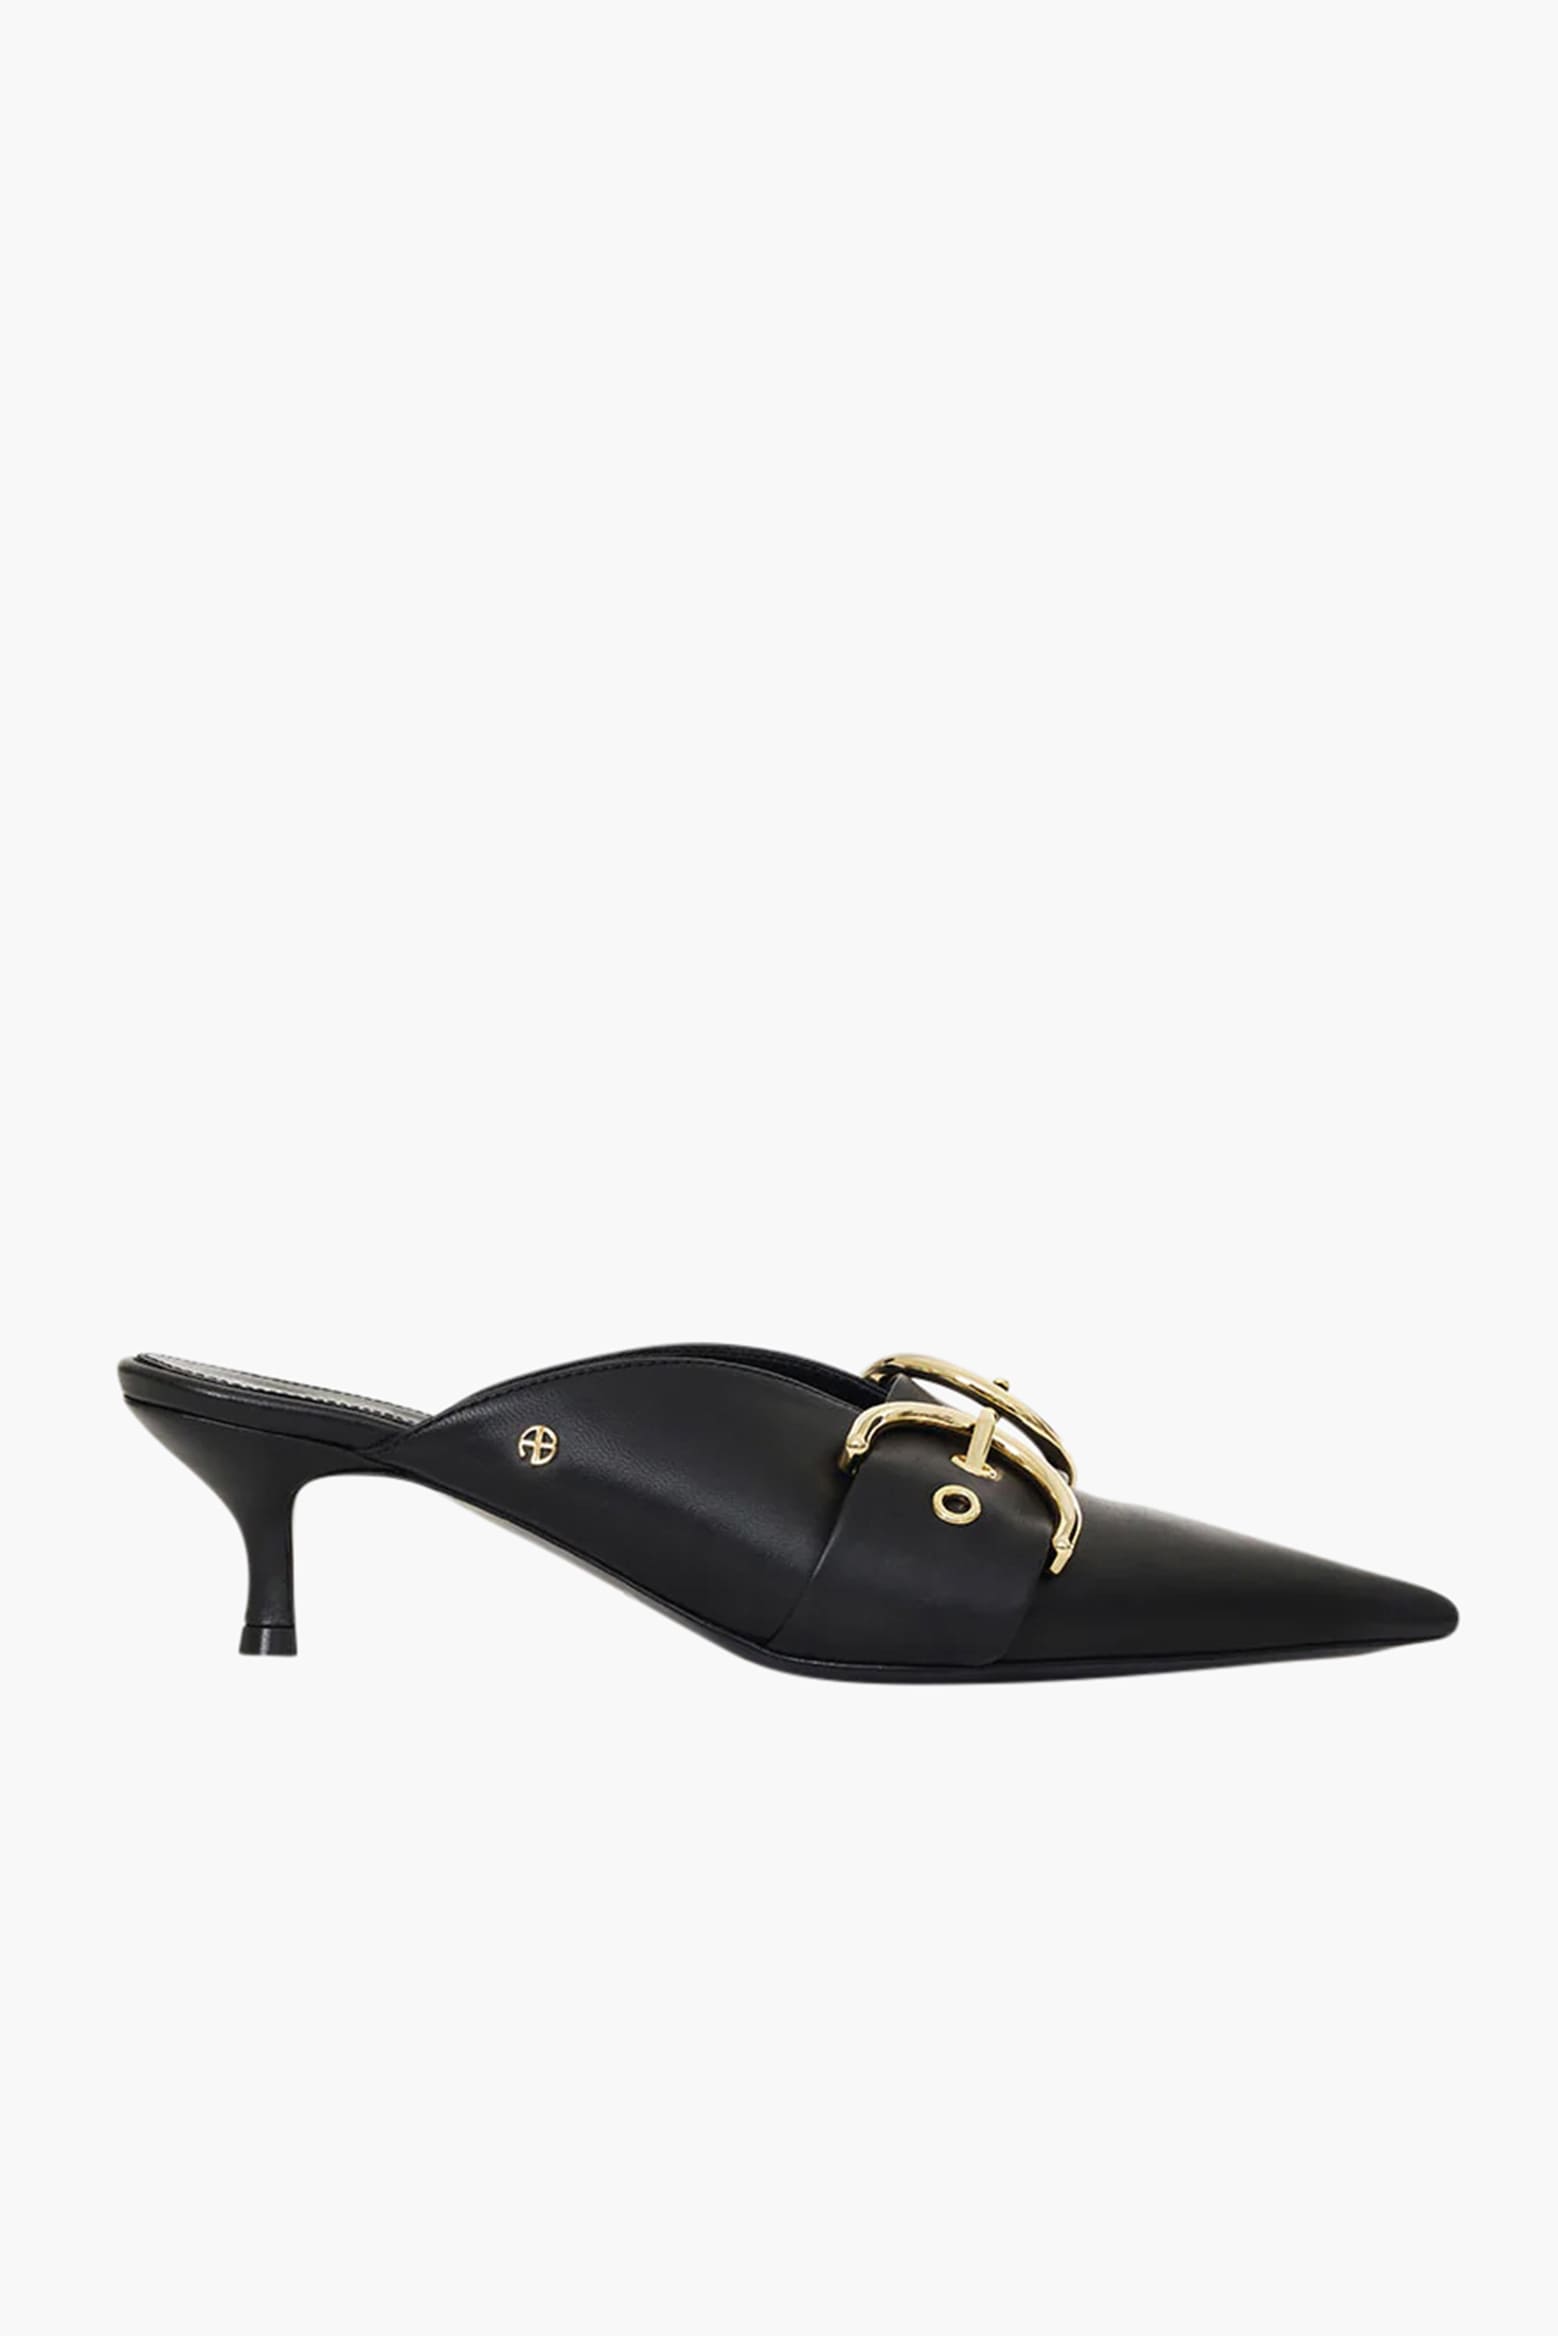 Anine Bing Zoe Mules in Black available at The New Trend Australia.